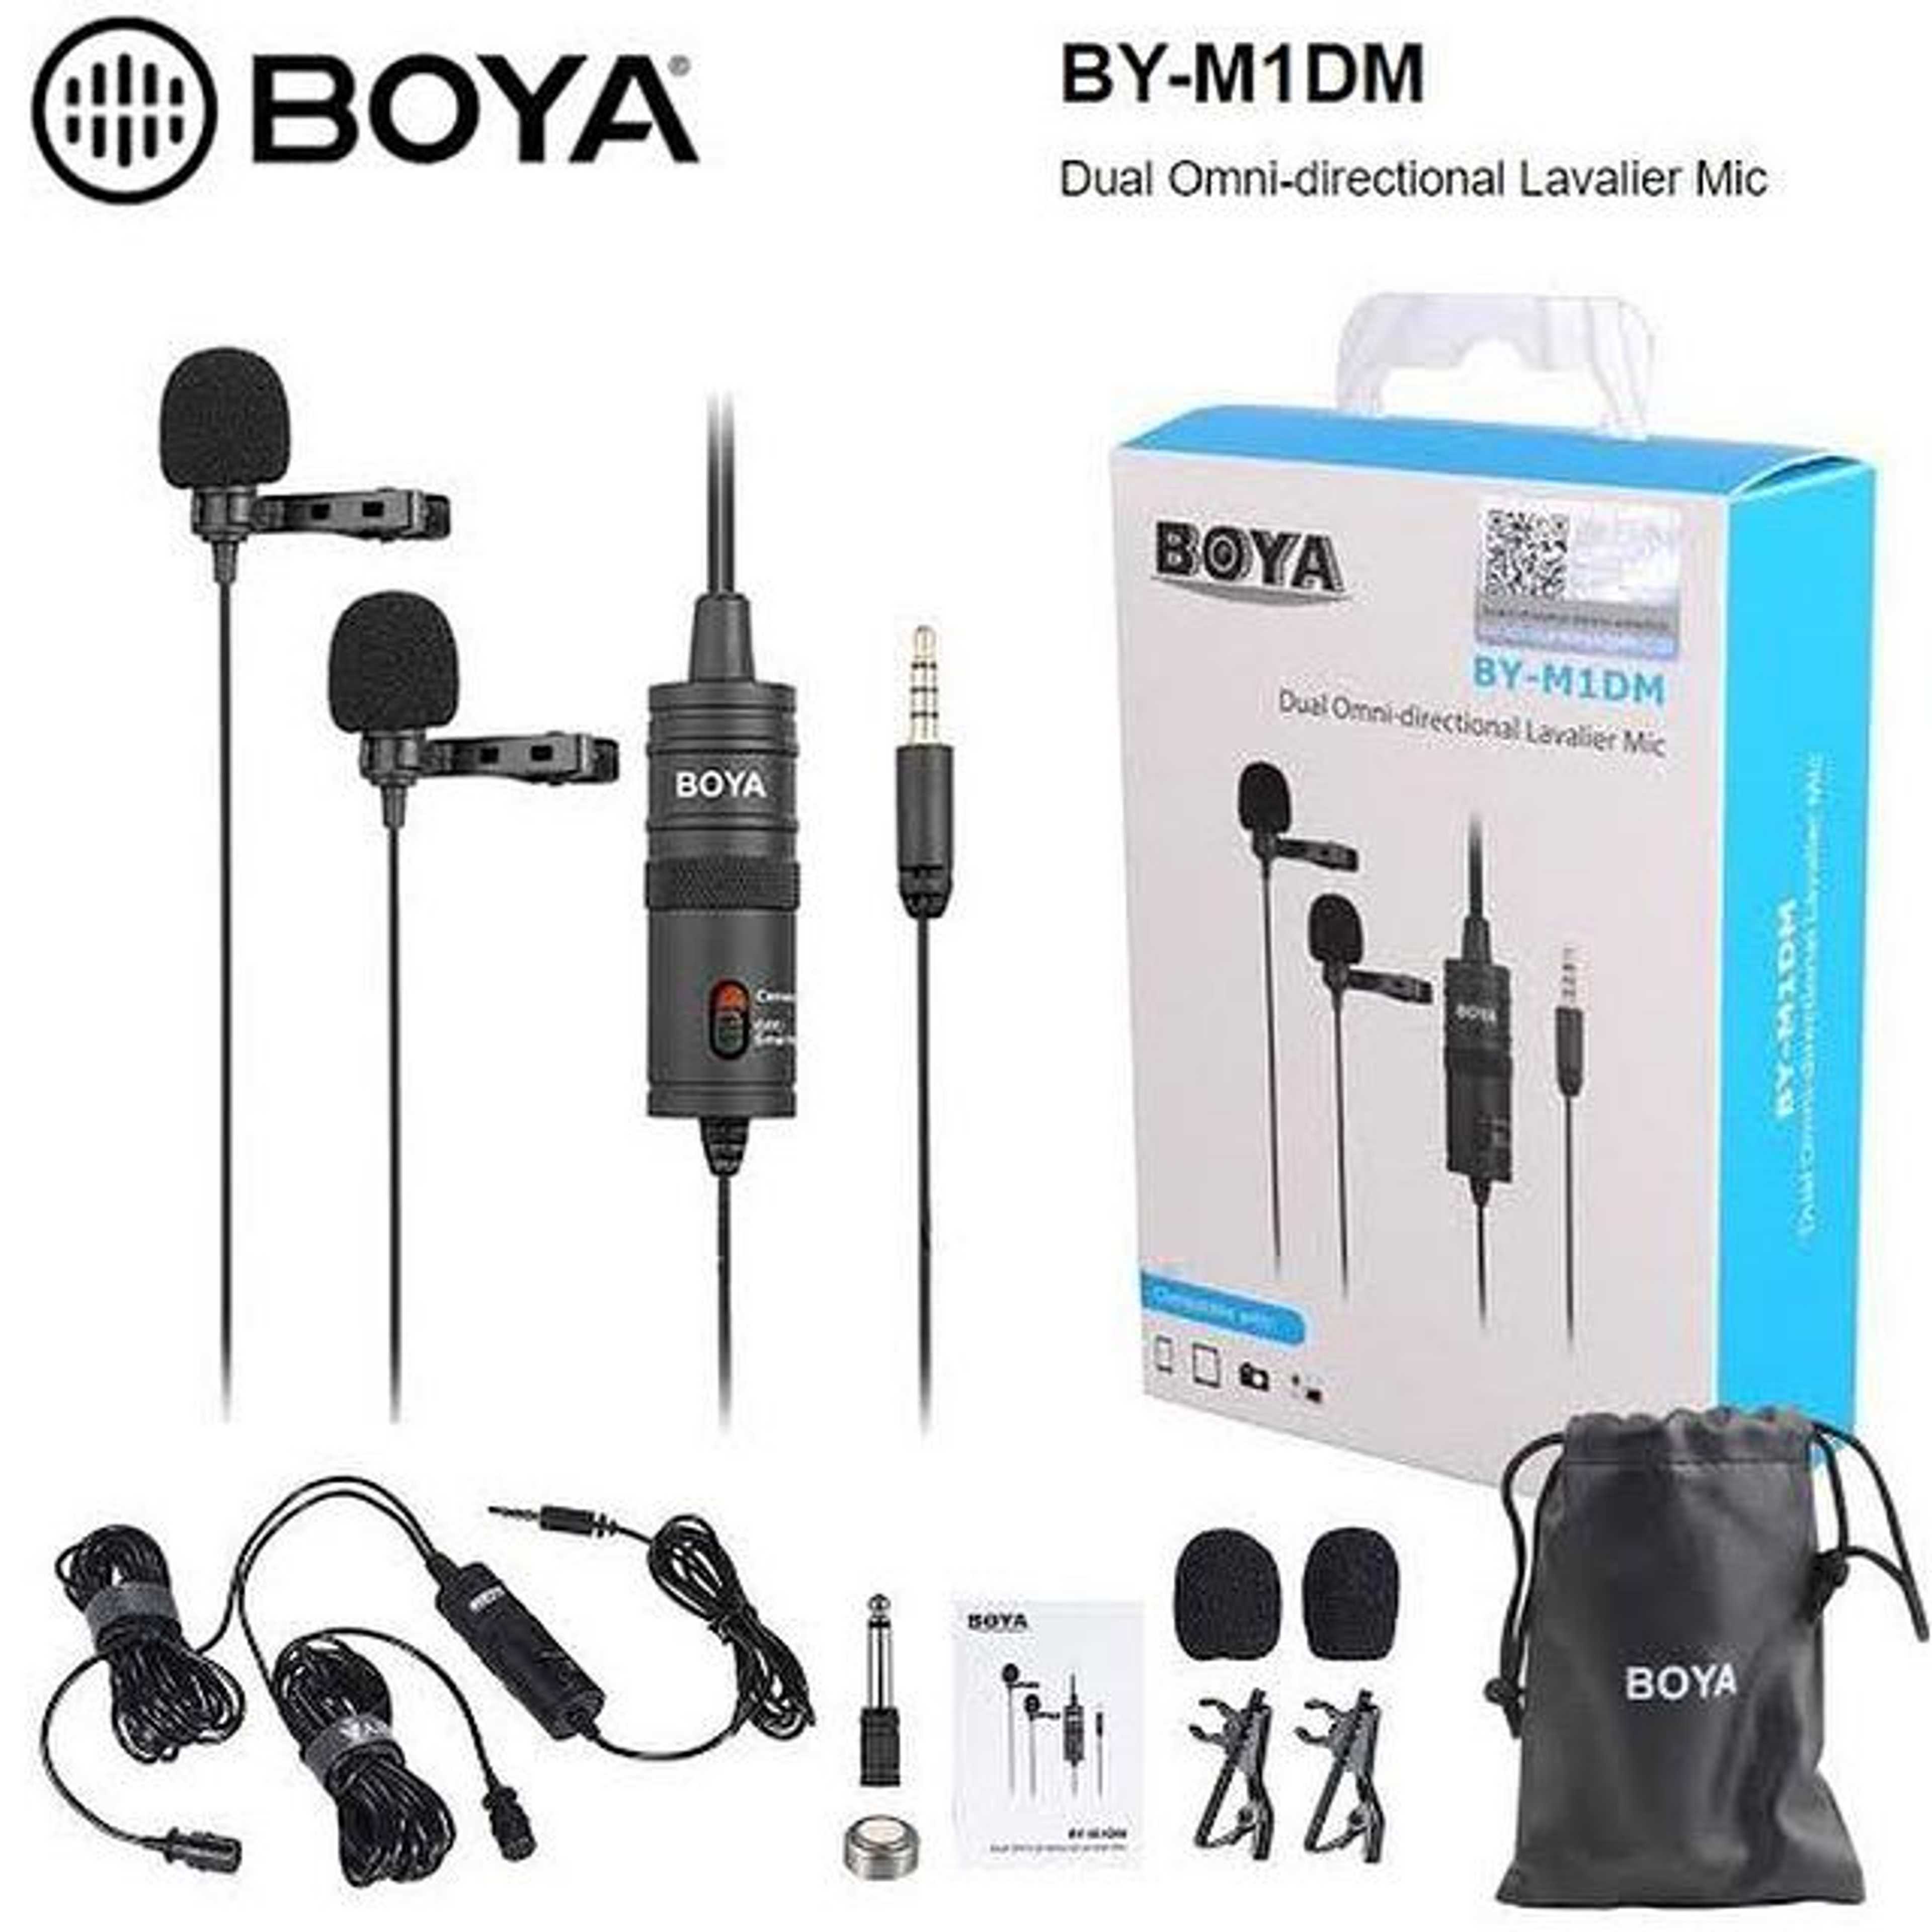 1 Year Warranty Boya BY M1 Collar Microphone Lavalier Lapel Mic for Android Smartphone PC Professional